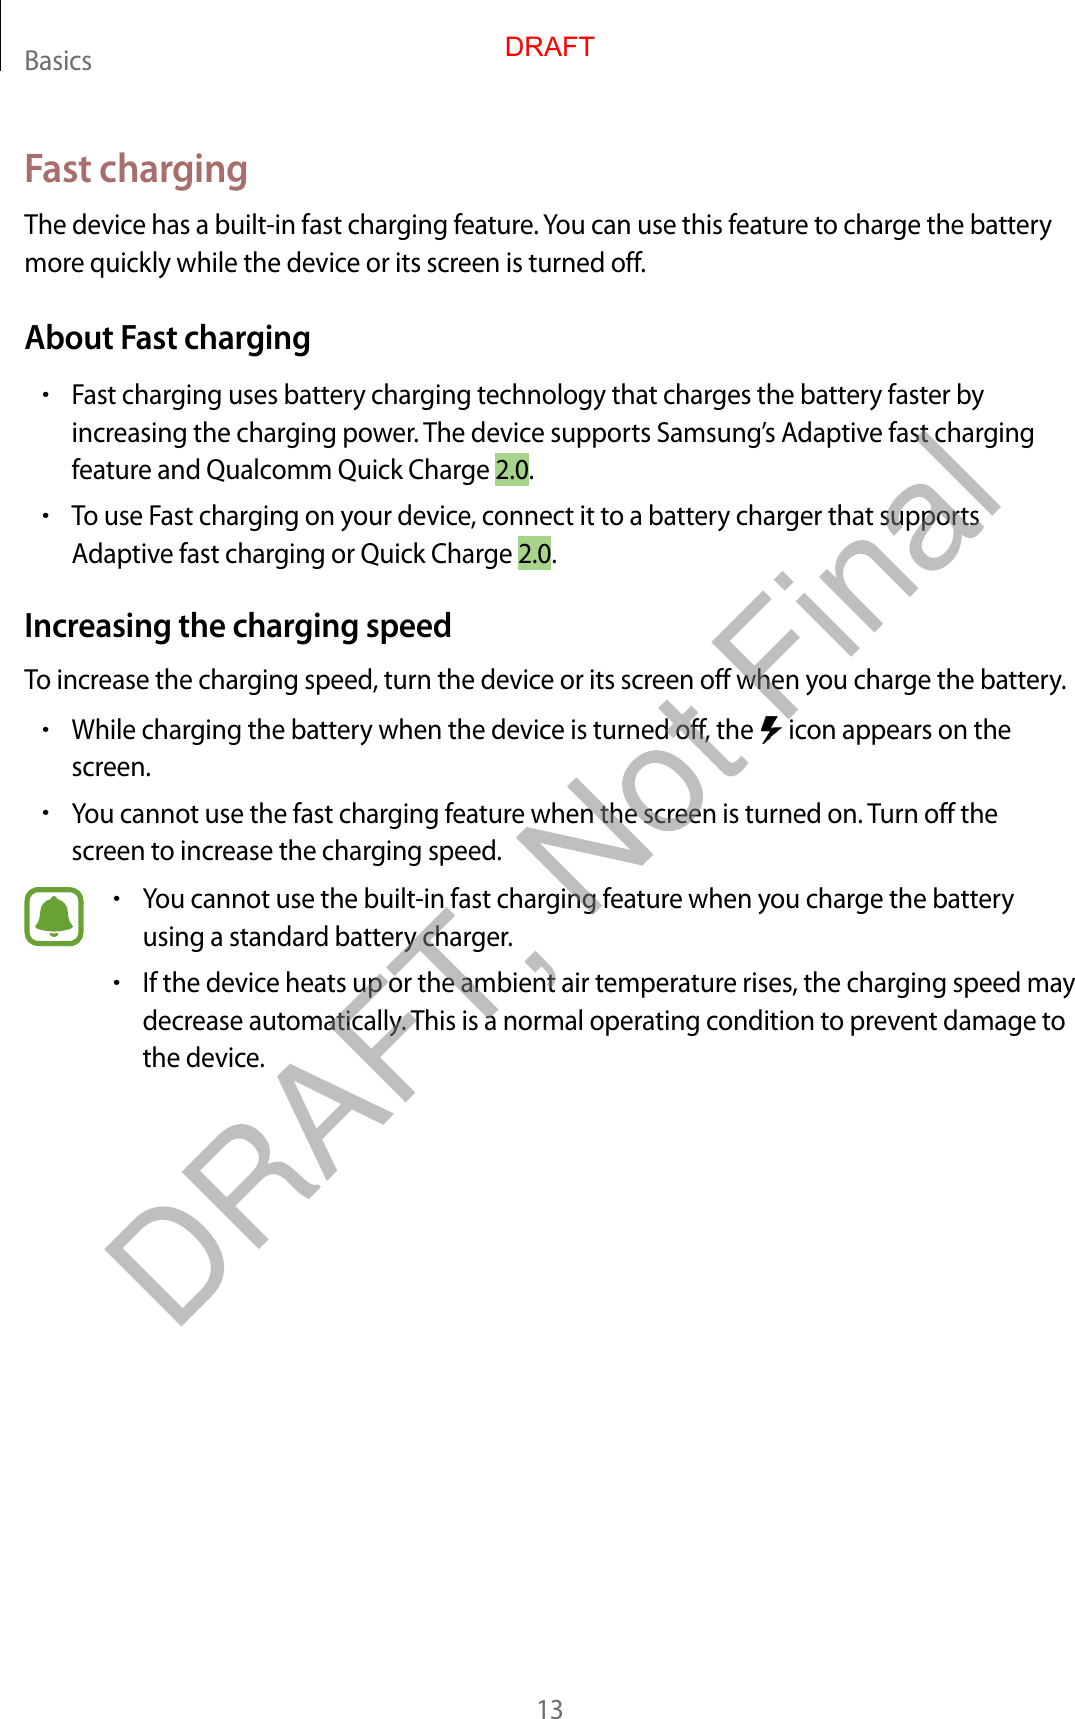 Basics13Fast chargingThe device has a built-in fast charging feature. You can use this feature to charge the battery more quickly while the device or its screen is turned off.About Fast charging•Fast charging uses battery charging technology that charges the battery faster by increasing the charging power. The device supports Samsung’s Adaptive fast charging feature and Qualcomm Quick Charge 2.0.•To use Fast charging on your device, connect it to a battery charger that supports Adaptive fast charging or Quick Charge 2.0.Increasing the charging speedTo increase the charging speed, turn the device or its screen off when you charge the battery.•While charging the battery when the device is turned off, the   icon appears on the screen.•You cannot use the fast charging feature when the screen is turned on. Turn off the screen to increase the charging speed.•You cannot use the built-in fast charging feature when you charge the battery using a standard battery charger.•If the device heats up or the ambient air temperature rises, the charging speed may decrease automatically. This is a normal operating condition to prevent damage to the device.DRAFTDRAFT, Not Final